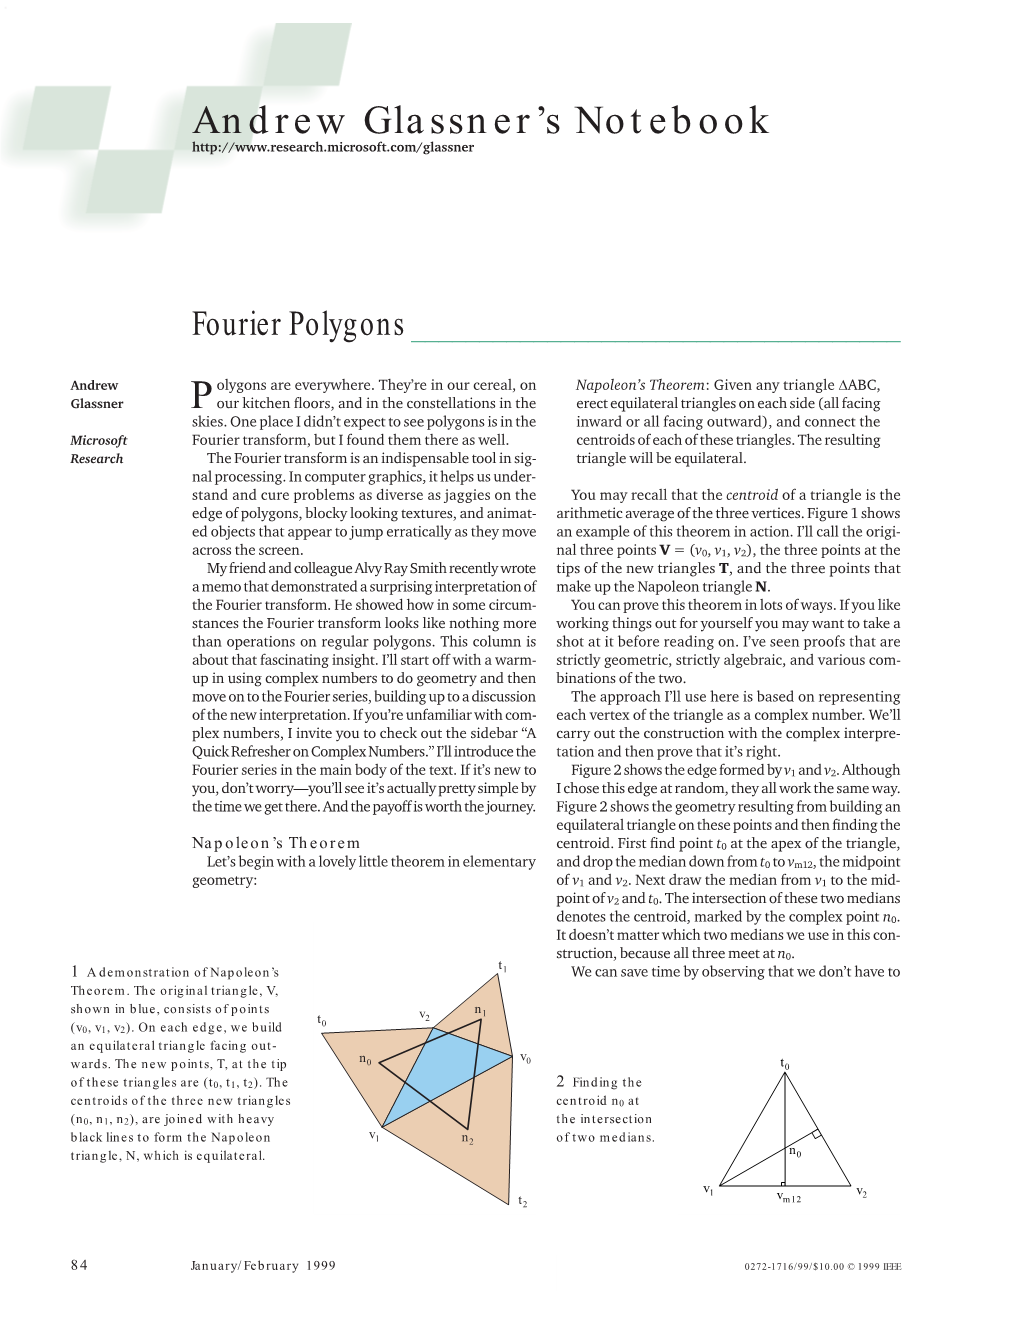 Fourier Polygons ______